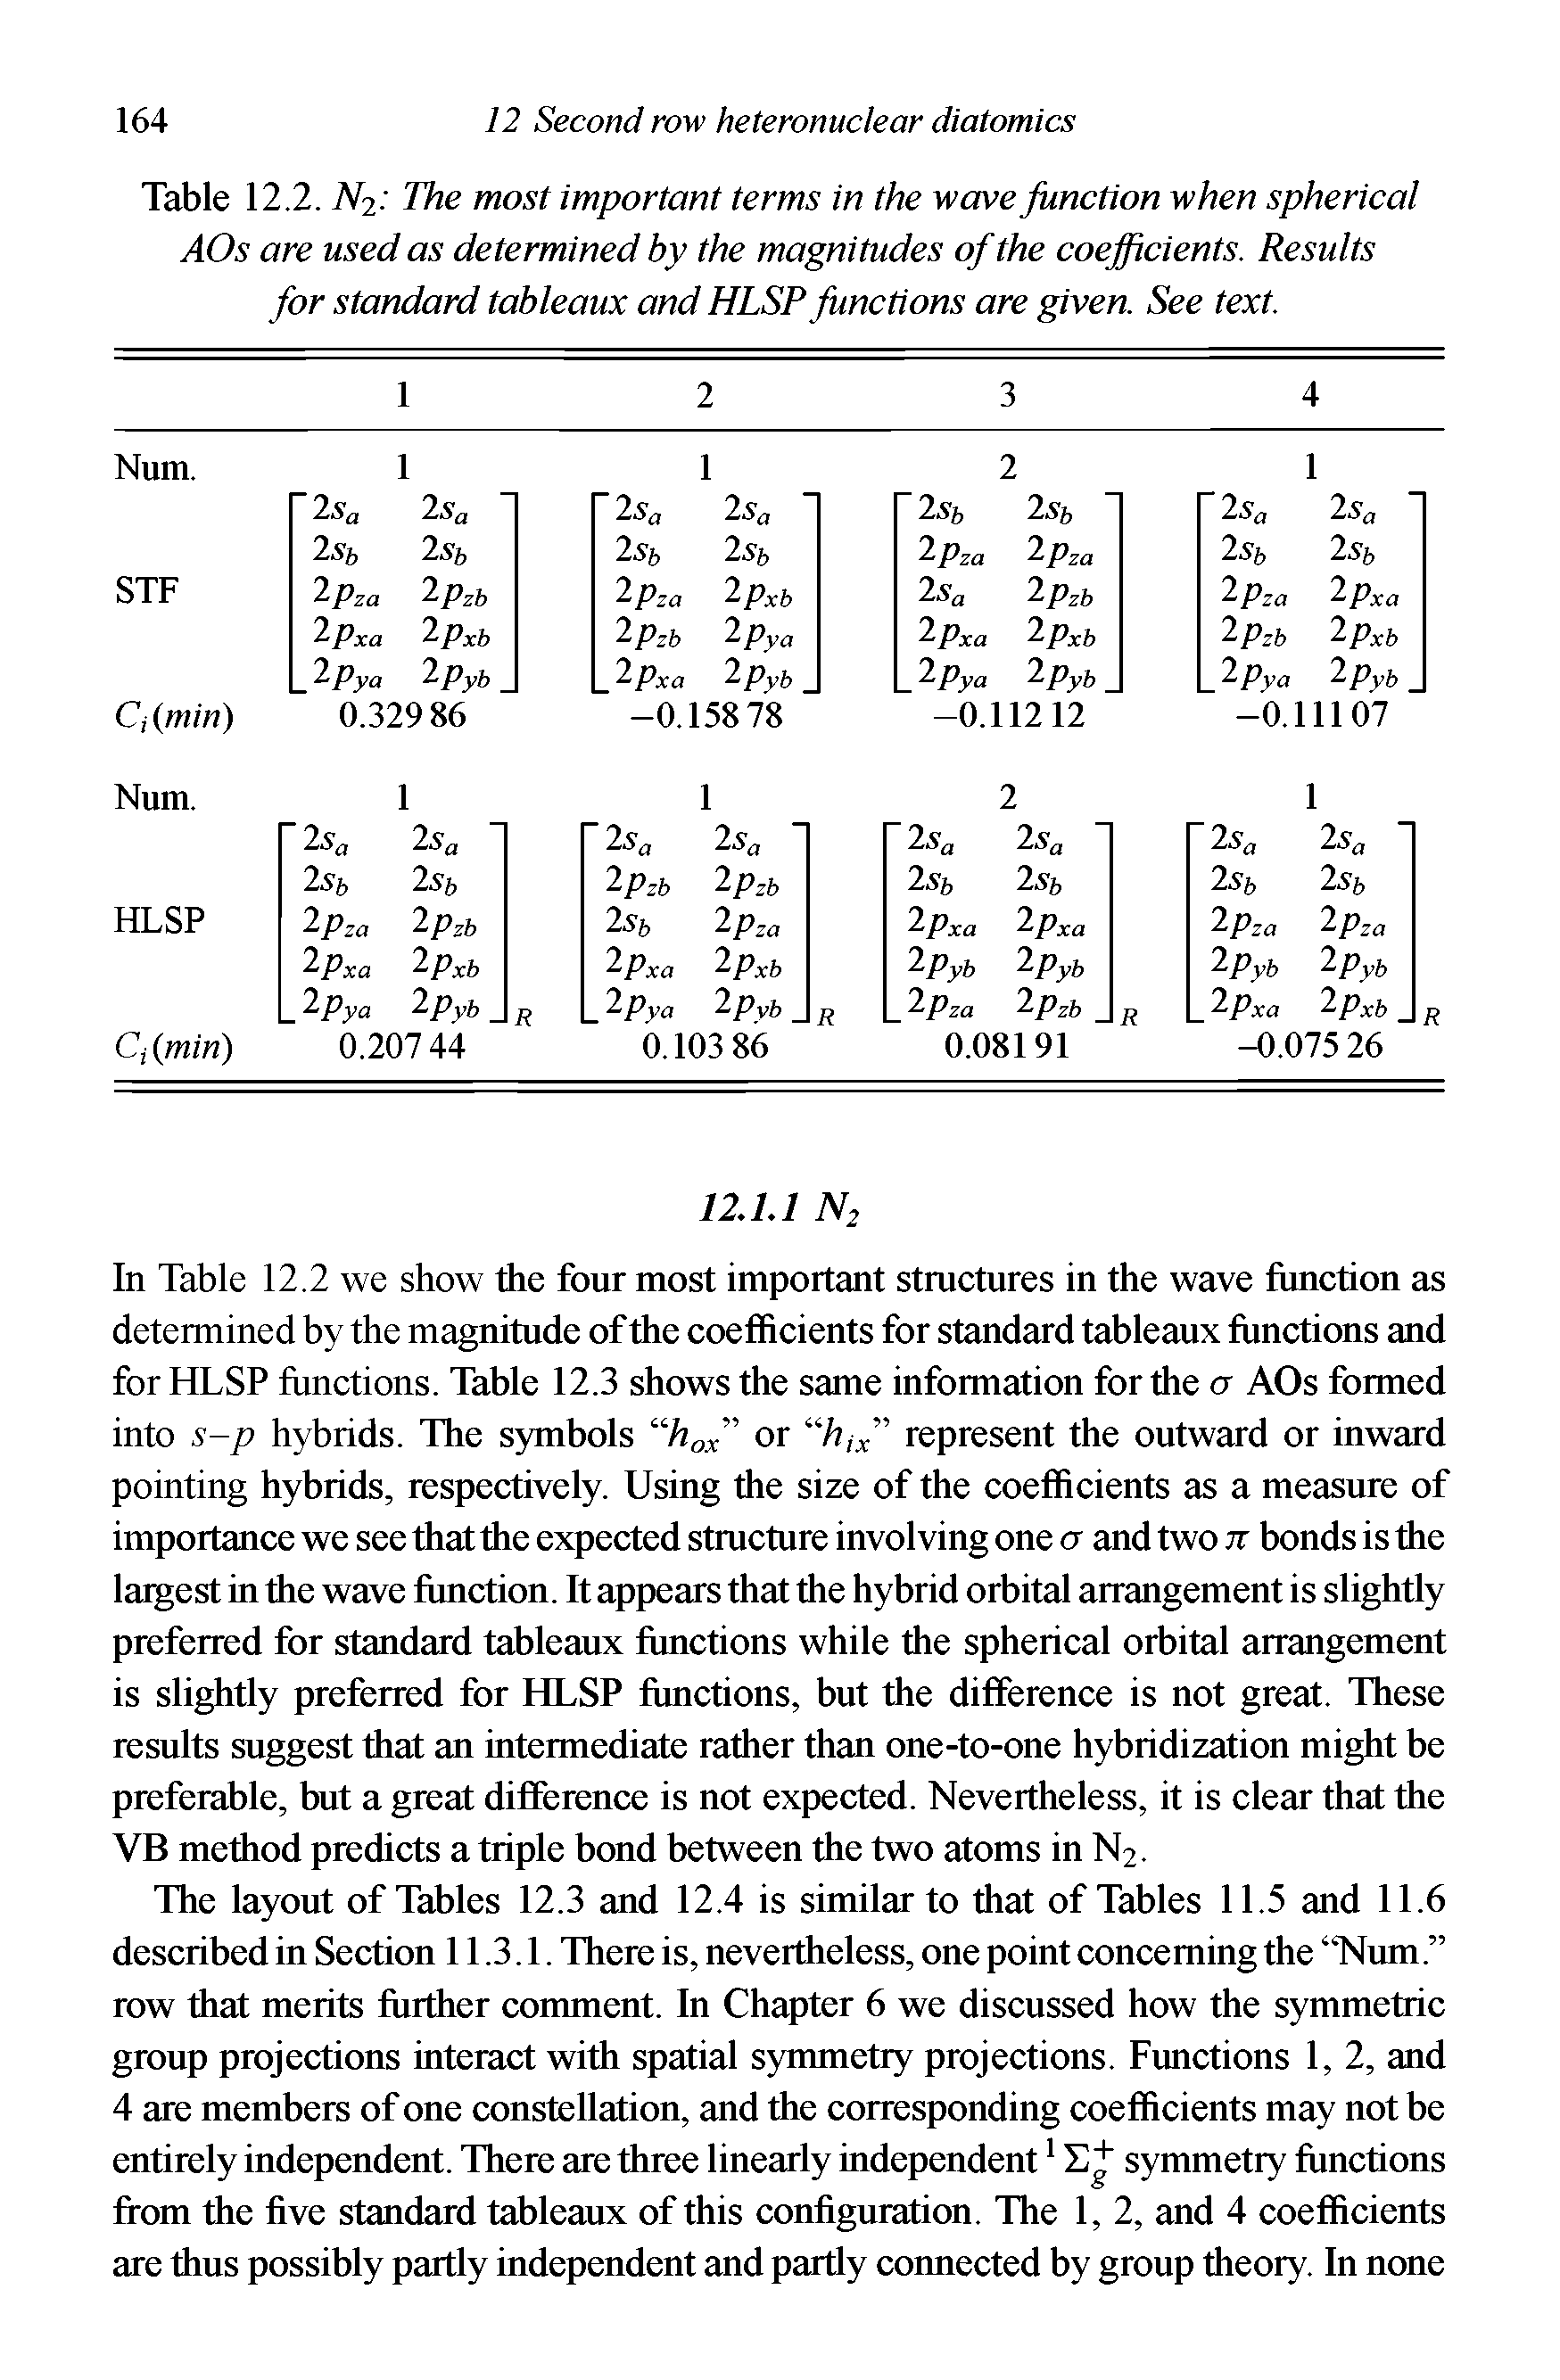 Table 12.2. N2 The most important terms in the wave function when spherical AOs are used as determined by the magnitudes of the coefficients. Results for standard tableaux and HLSP functions are given. See text.